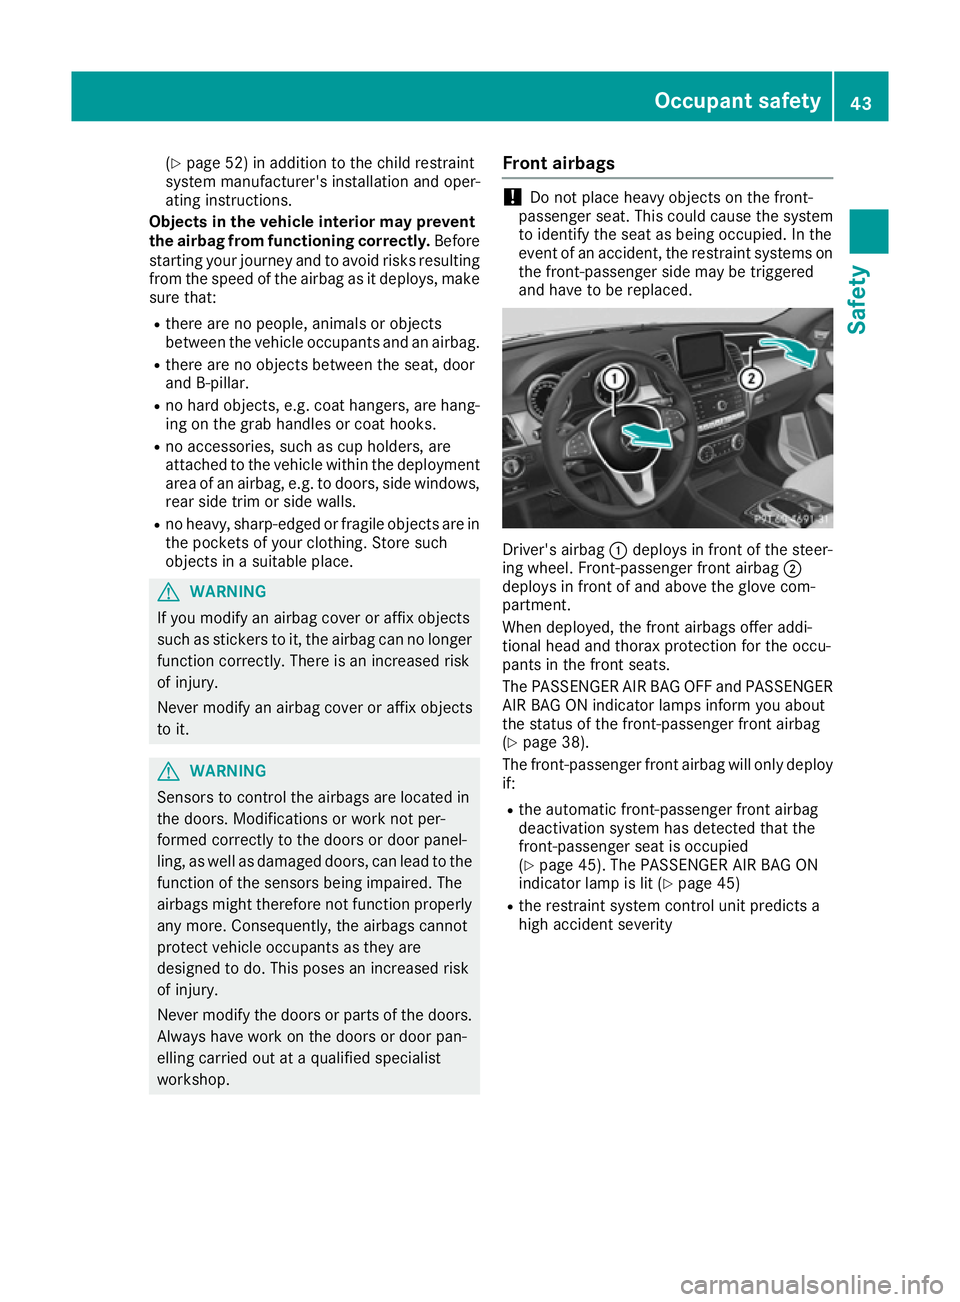 MERCEDES-BENZ GLE COUPE 2015 Service Manual (Y
page 52) in addition to the child restraint
system manufacturer's installation and oper-
ating instructions.
Objects in the vehicle interior may prevent
the airbag from functioning correctly. B